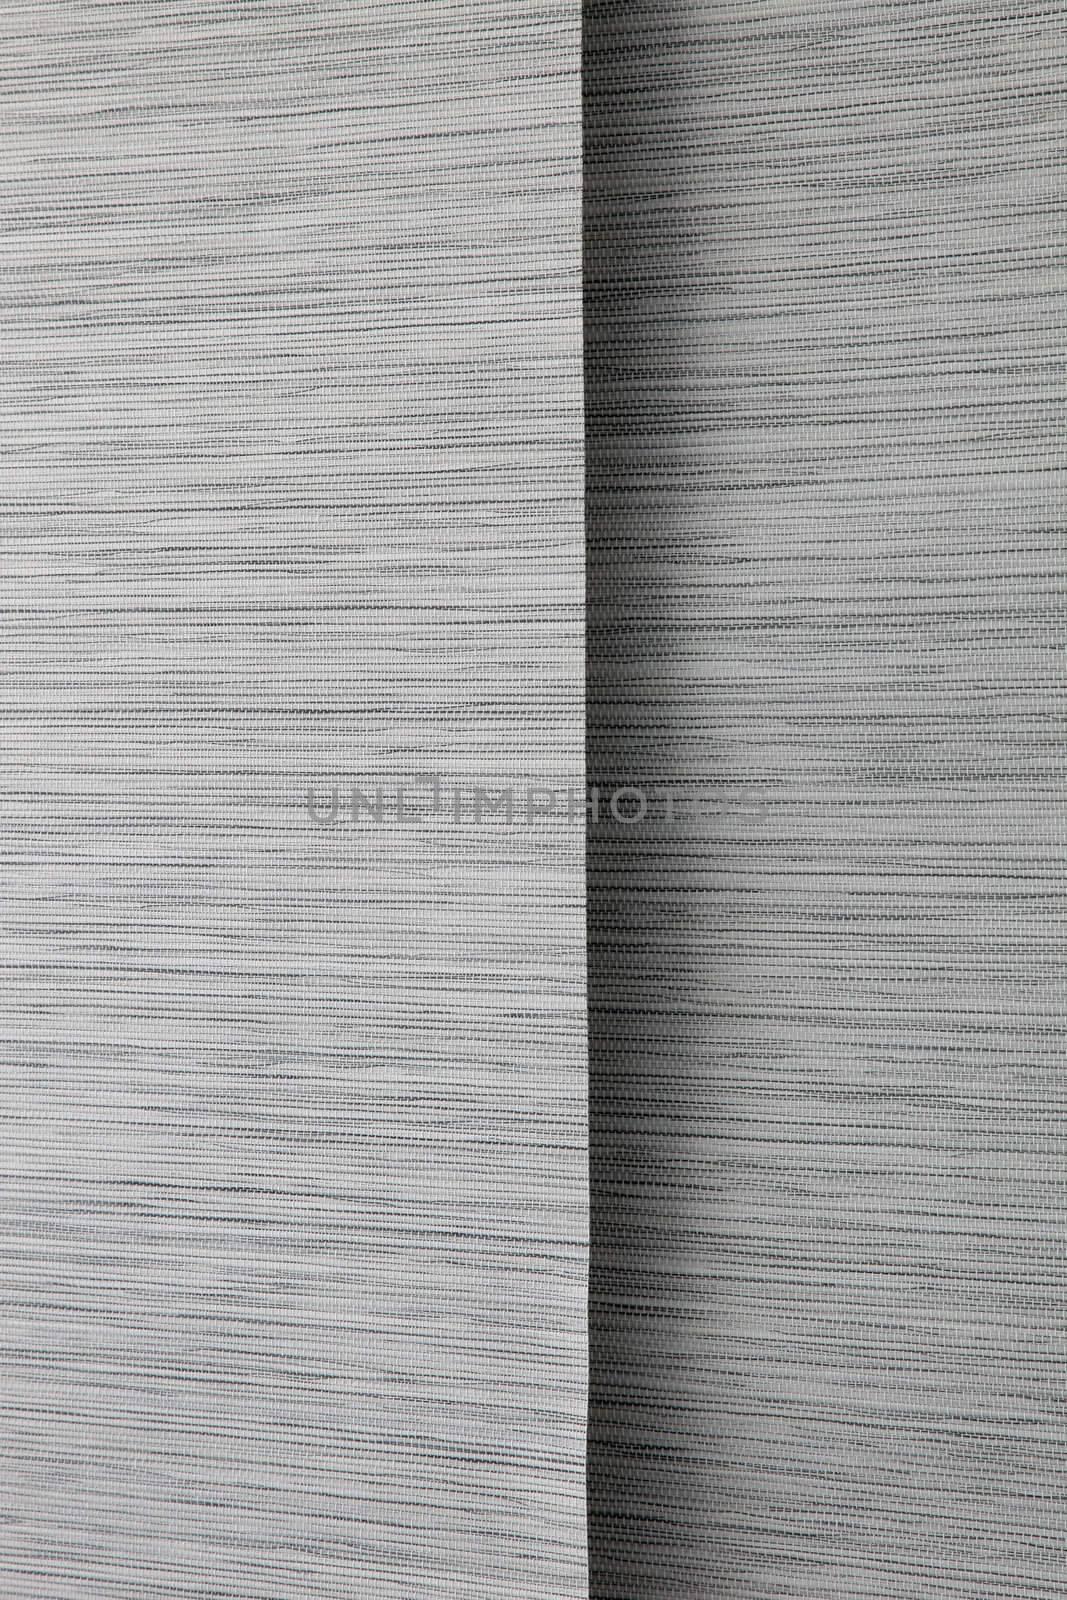 Black, grey and white colored blinds by Farina6000